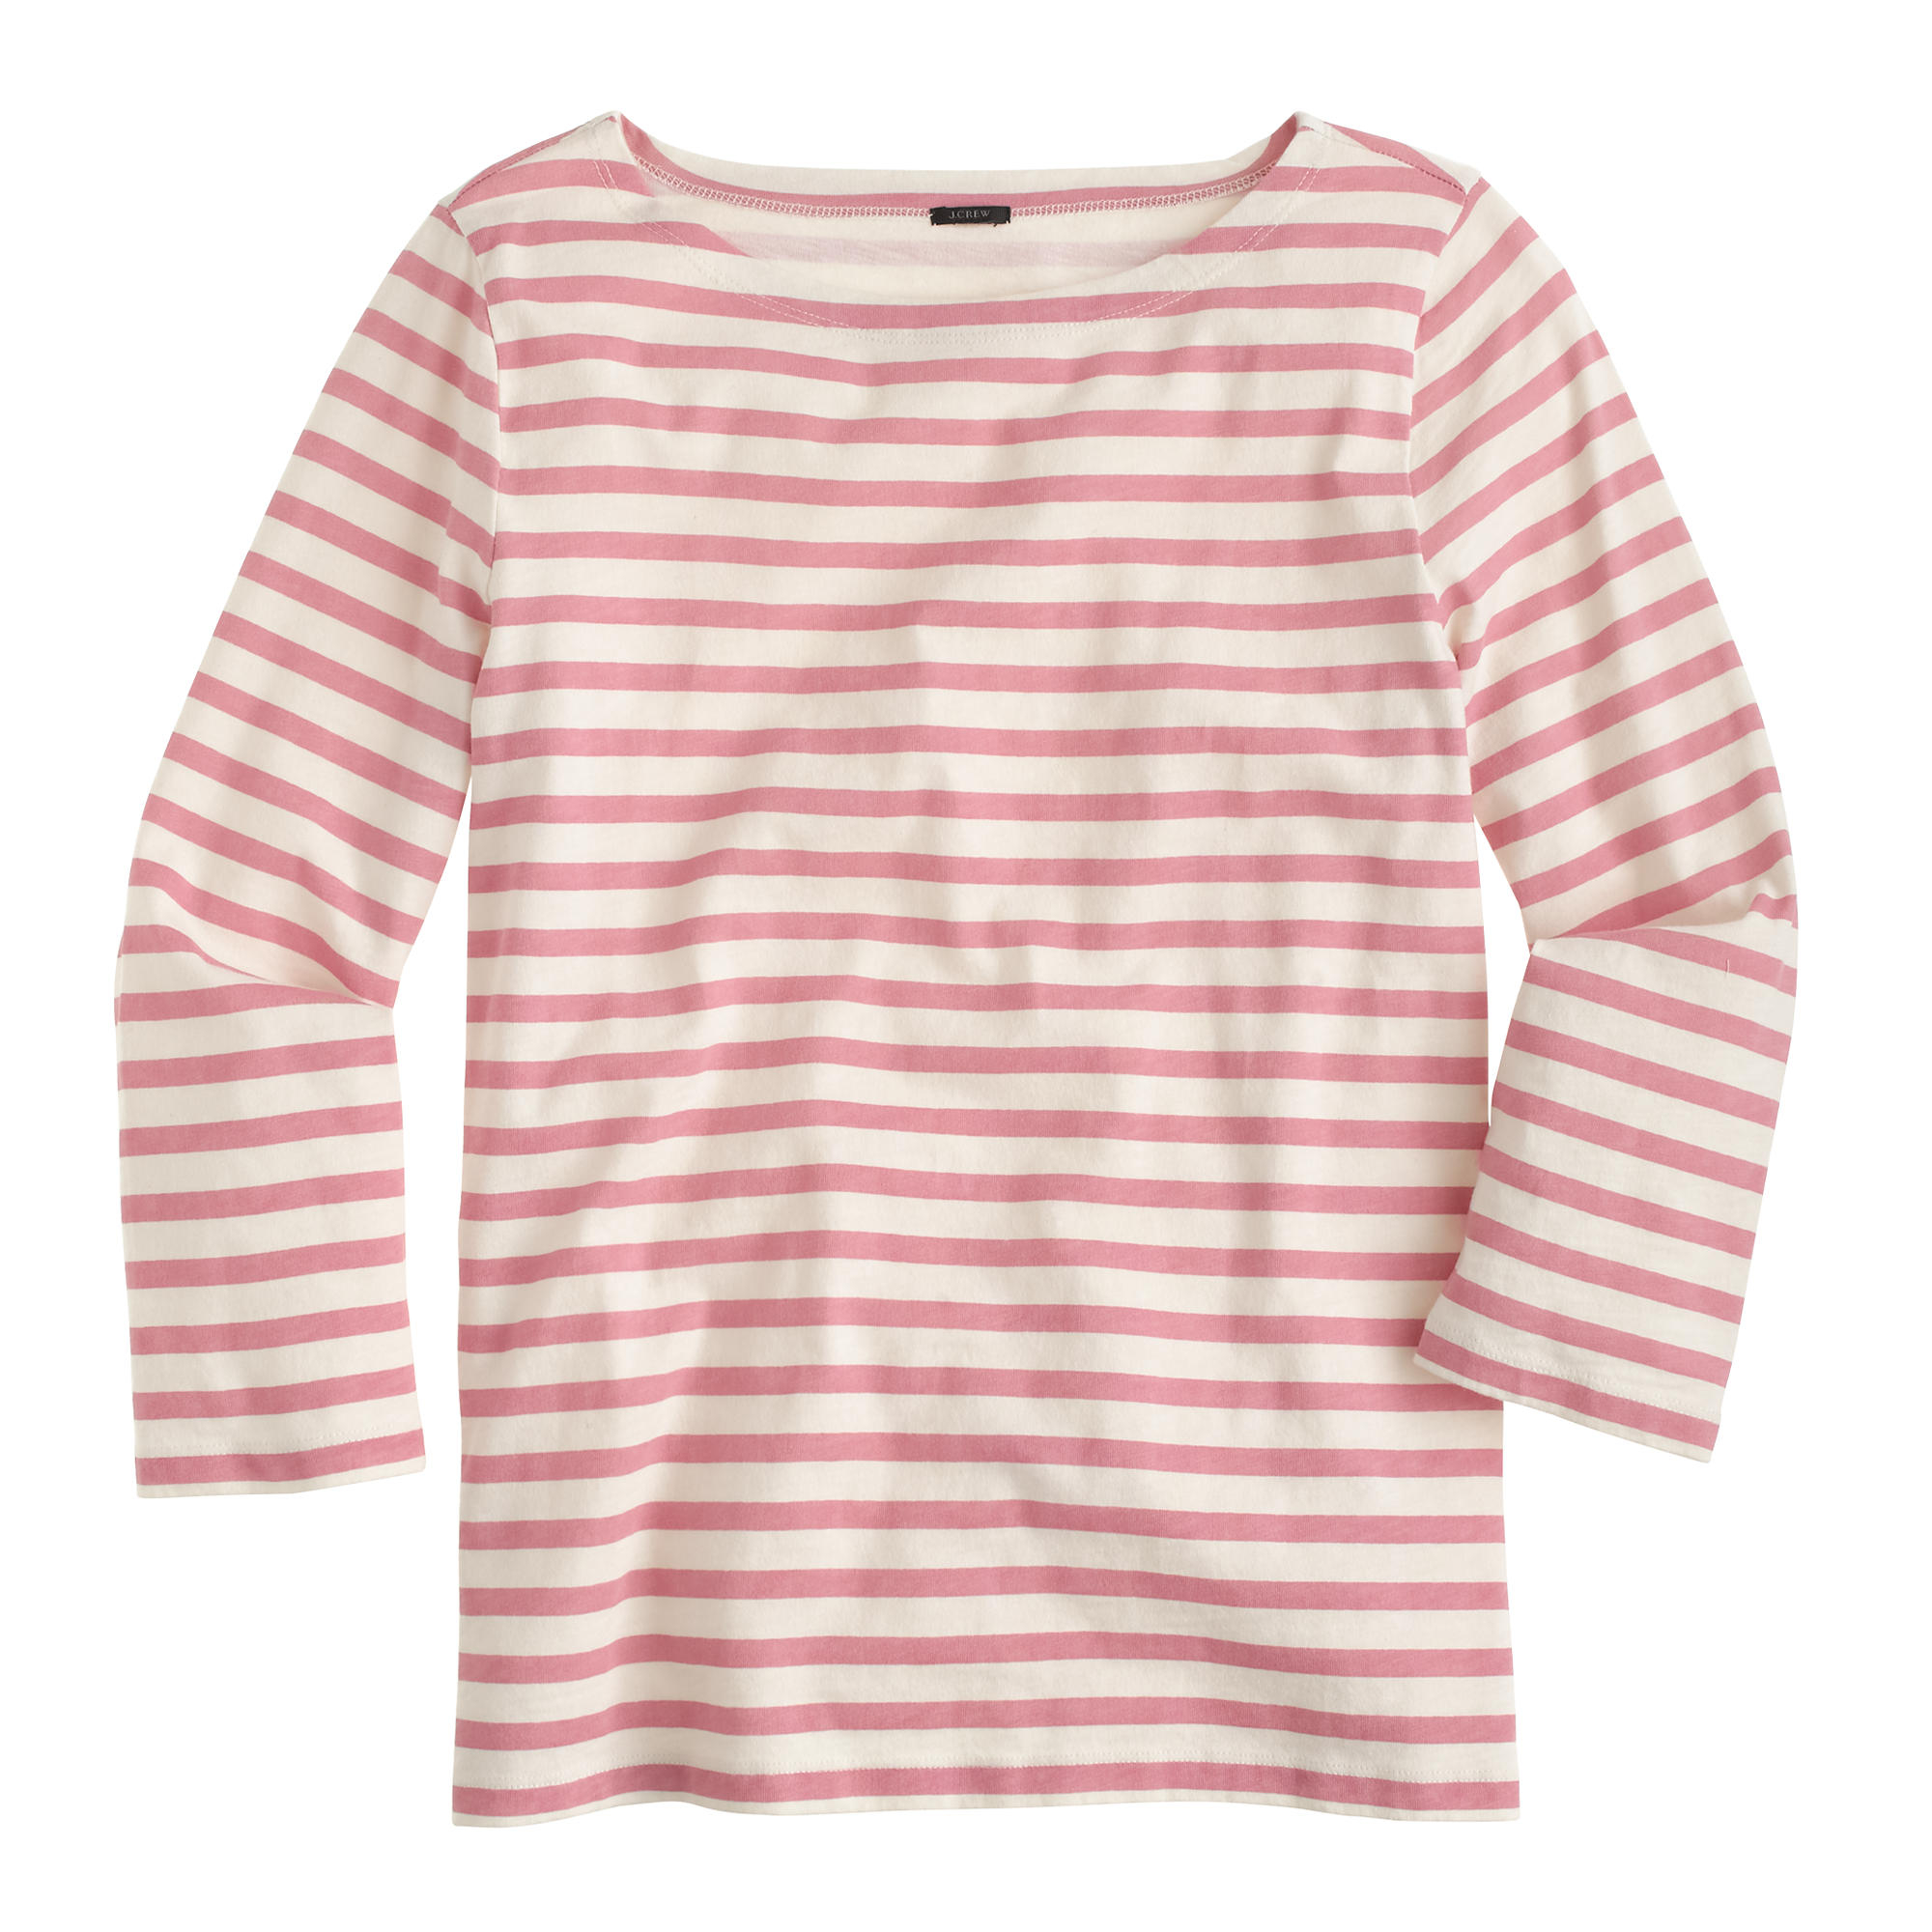 Lyst - J.Crew Striped Boatneck T-shirt in Pink